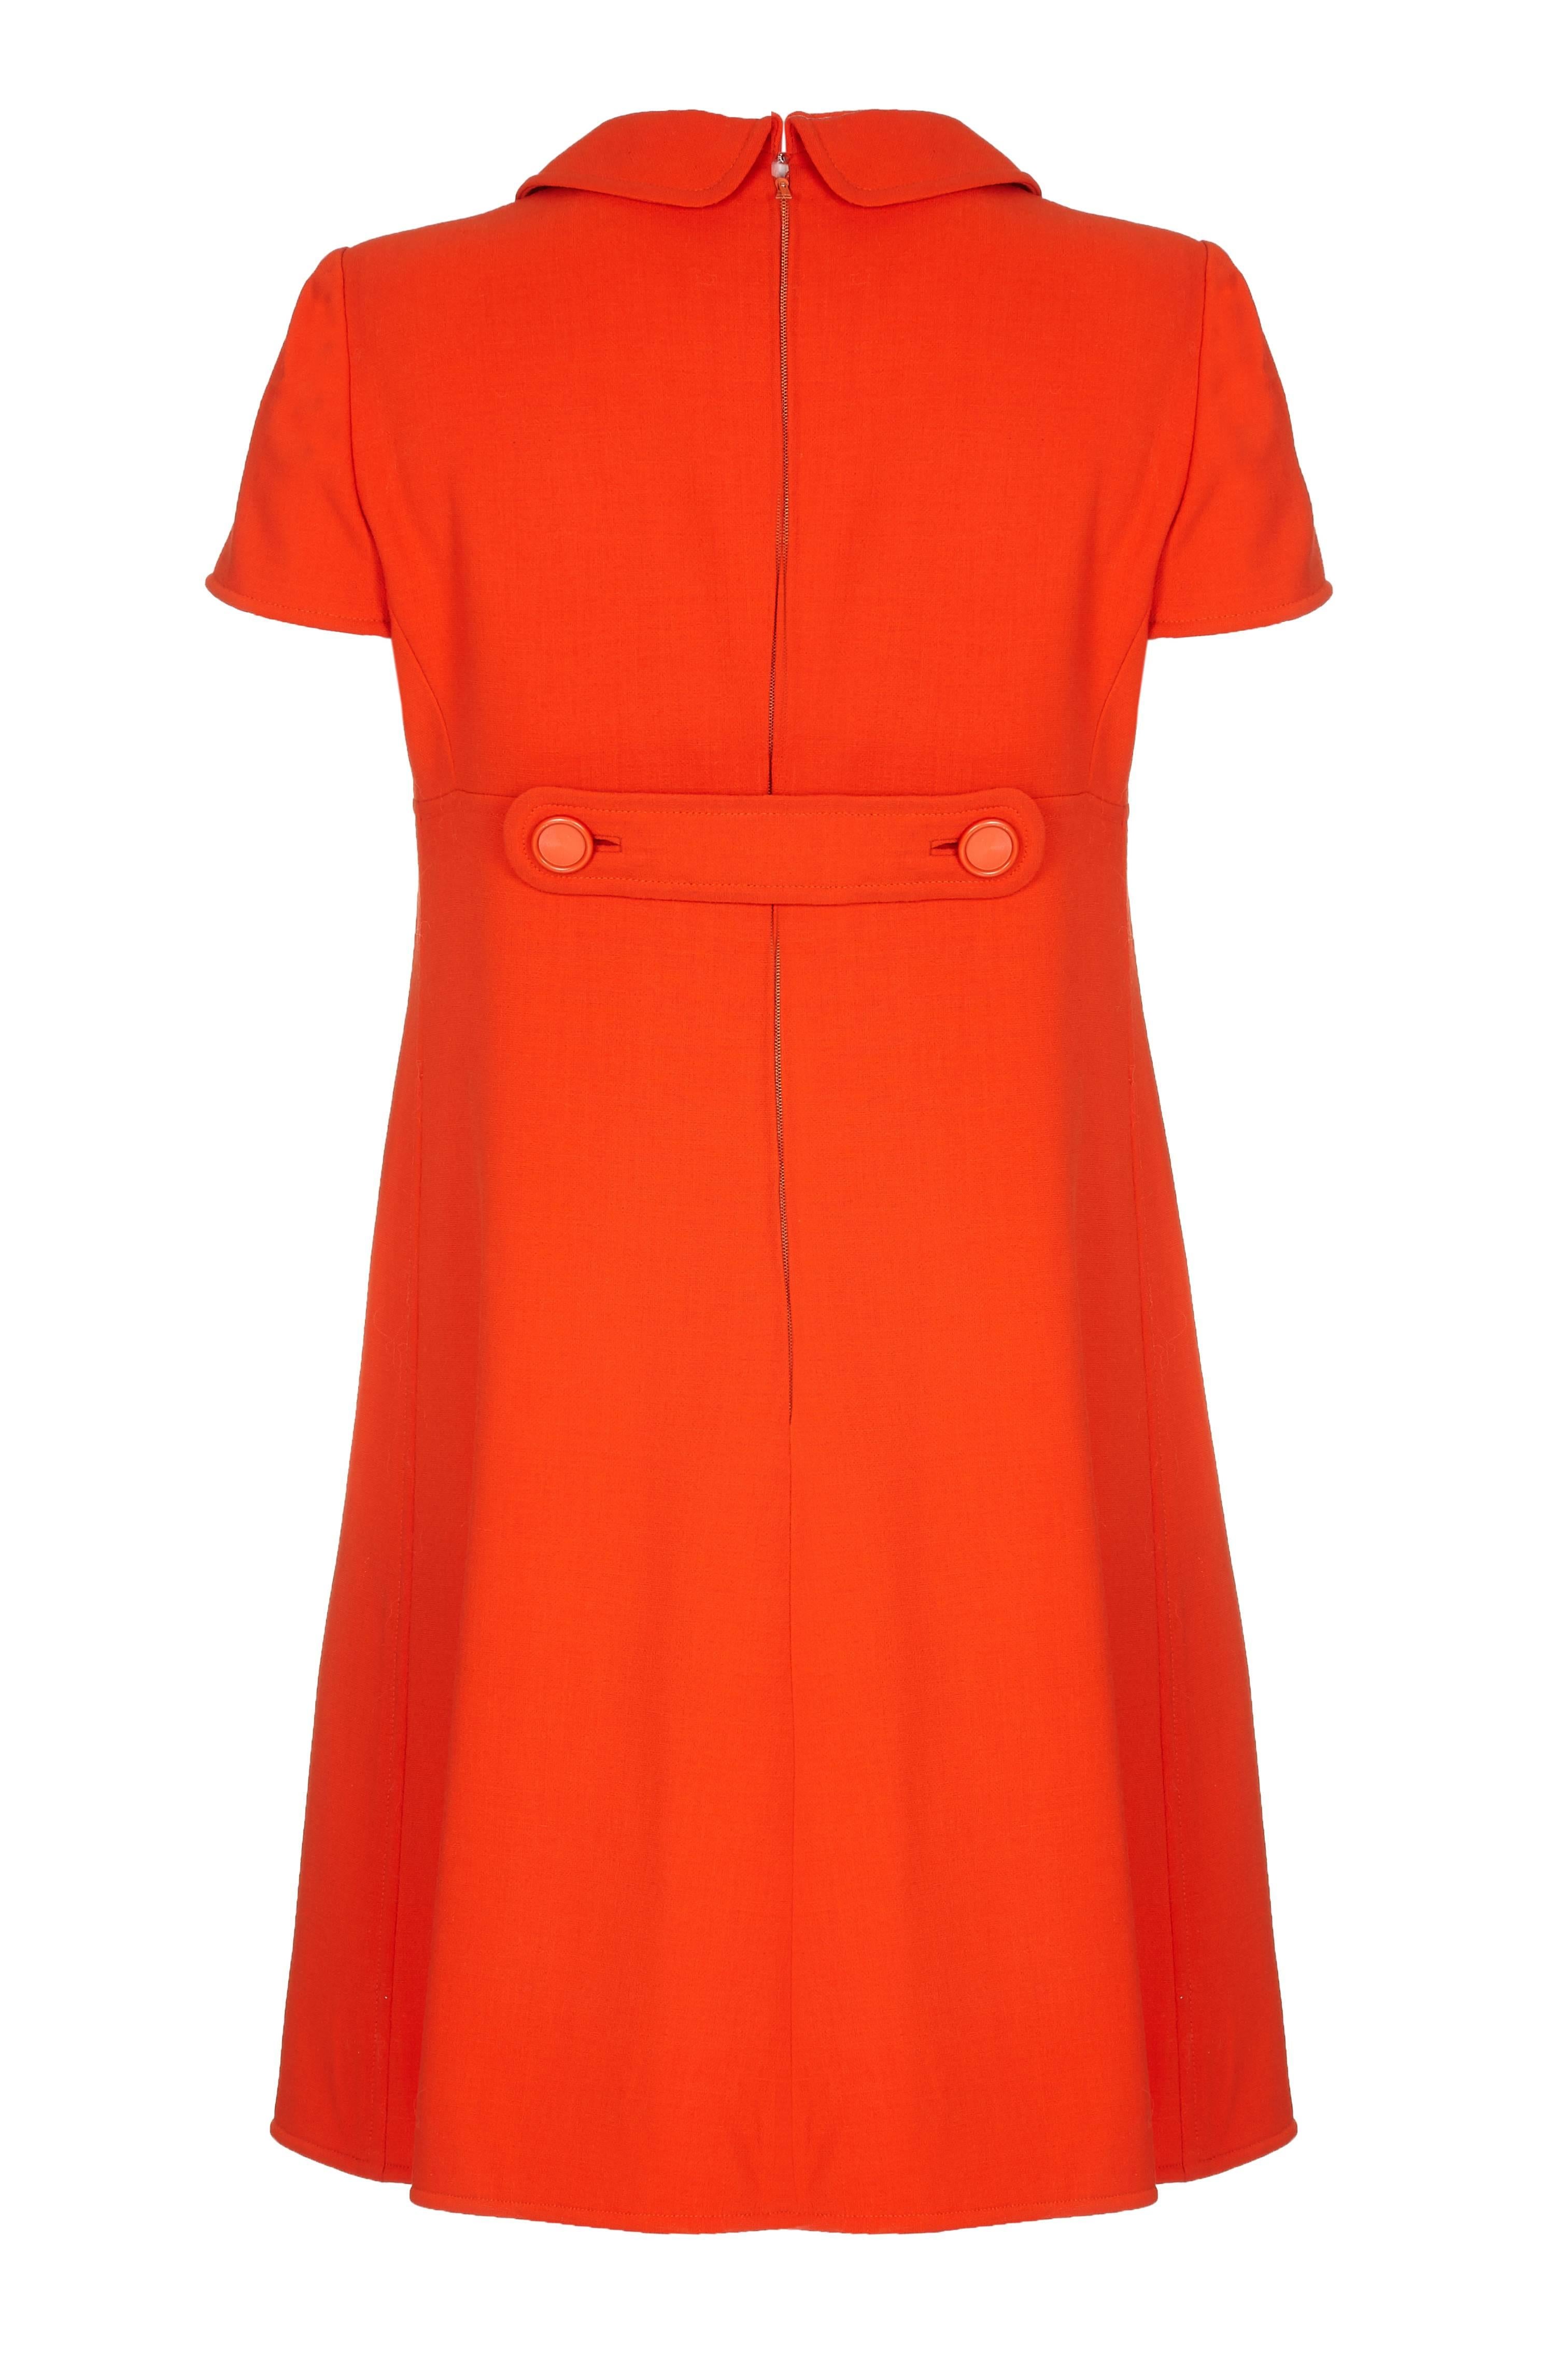 Late 1960s Courrèges wool shift dress in bright orange red with signature circular pocket detail. With cap sleeves and stylish peter pan collar this dress is beautifully cut and could be dressed up or down. Fully lined in what feels like cream silk